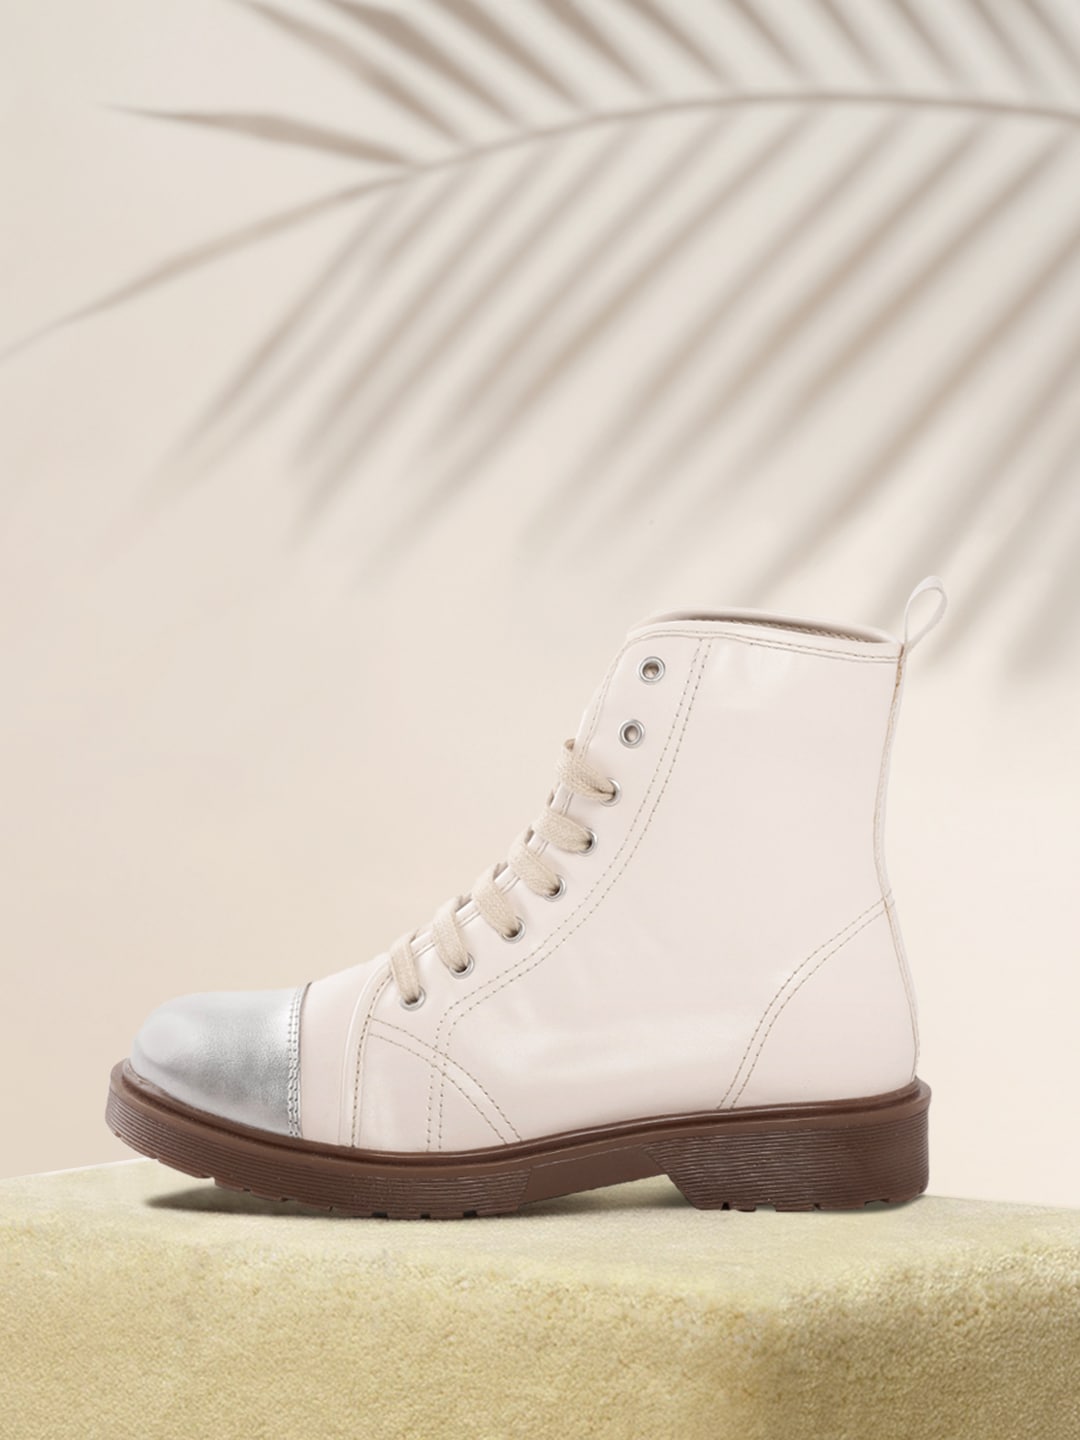 CORSICA Women Cream-Coloured & Silver-Toned Colourblocked Mid-Top Flat Boots Price in India